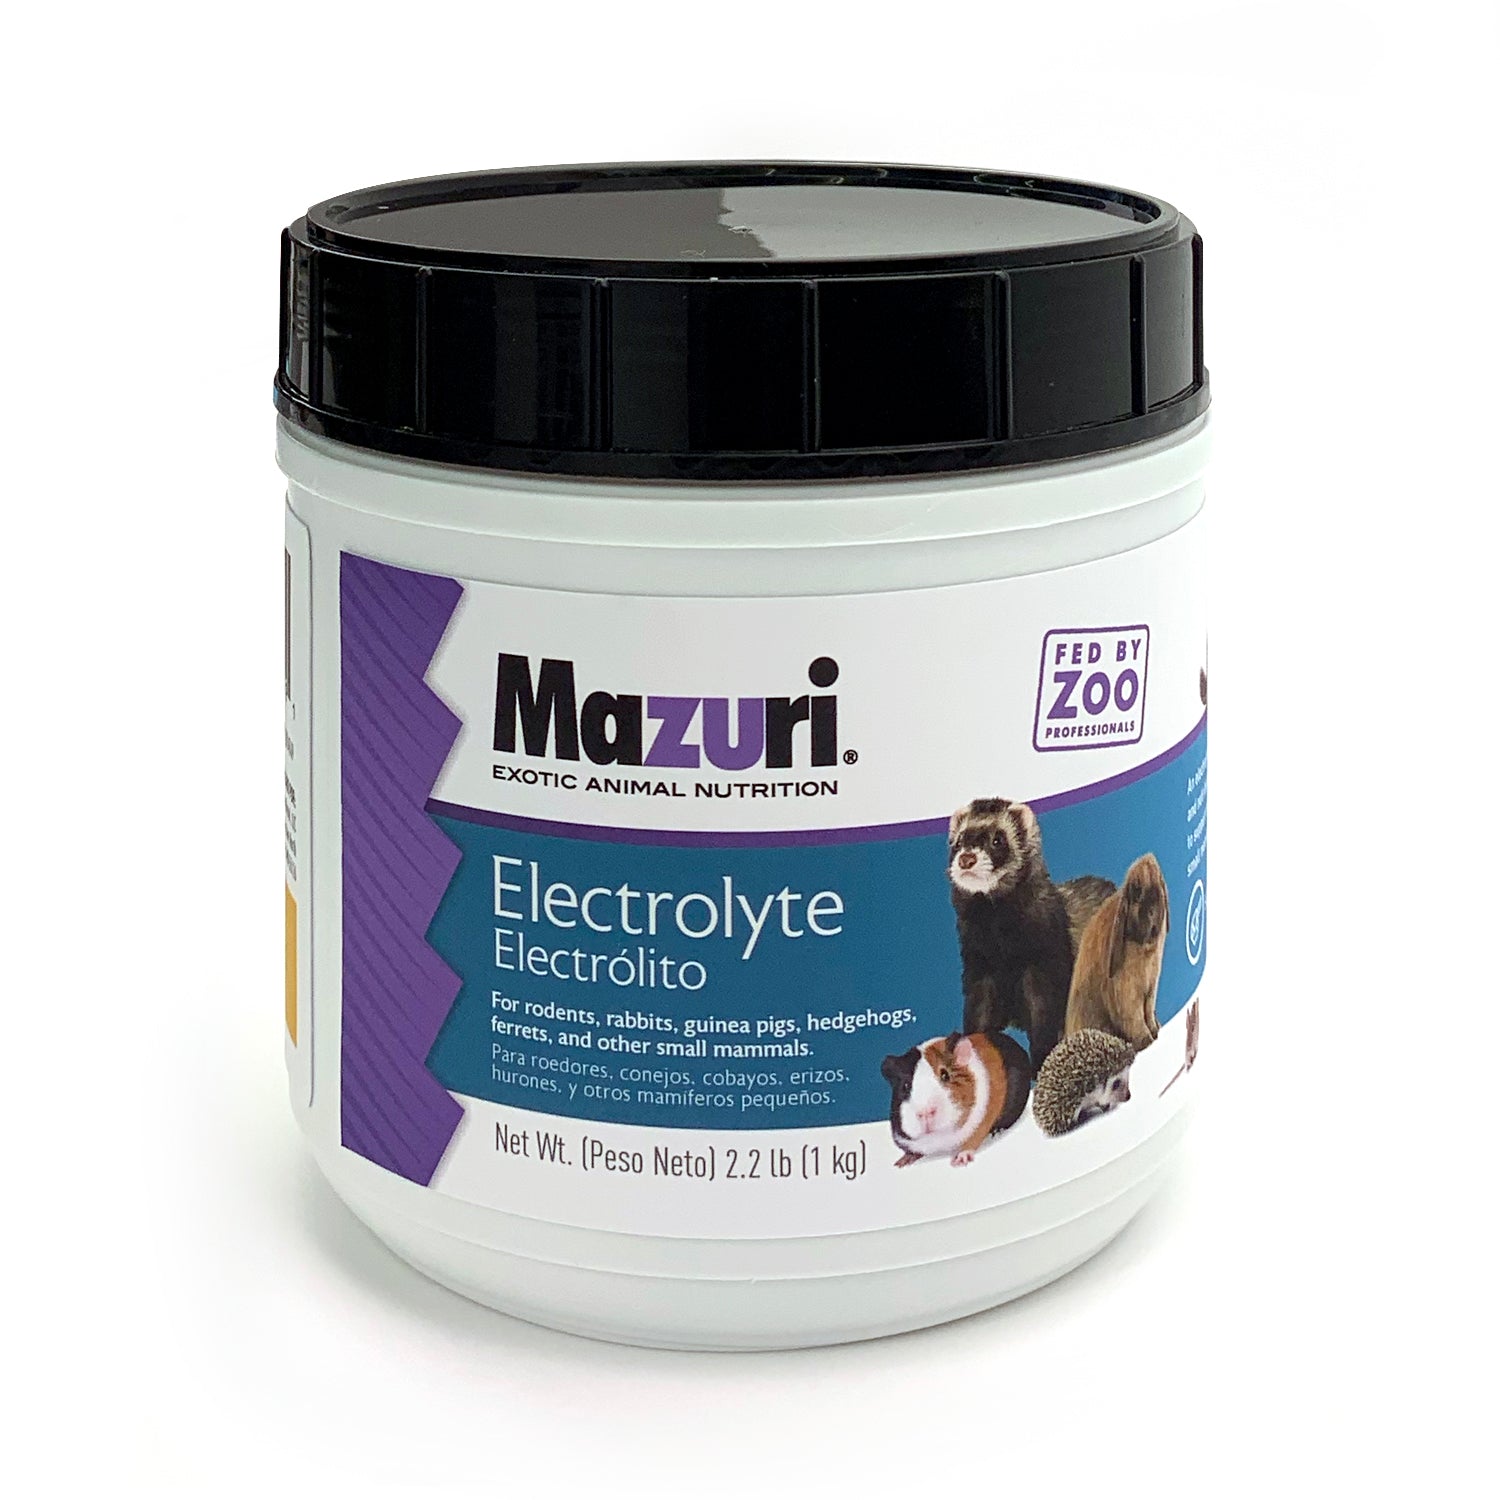 Mazuri Electrolyte canister with a black lid